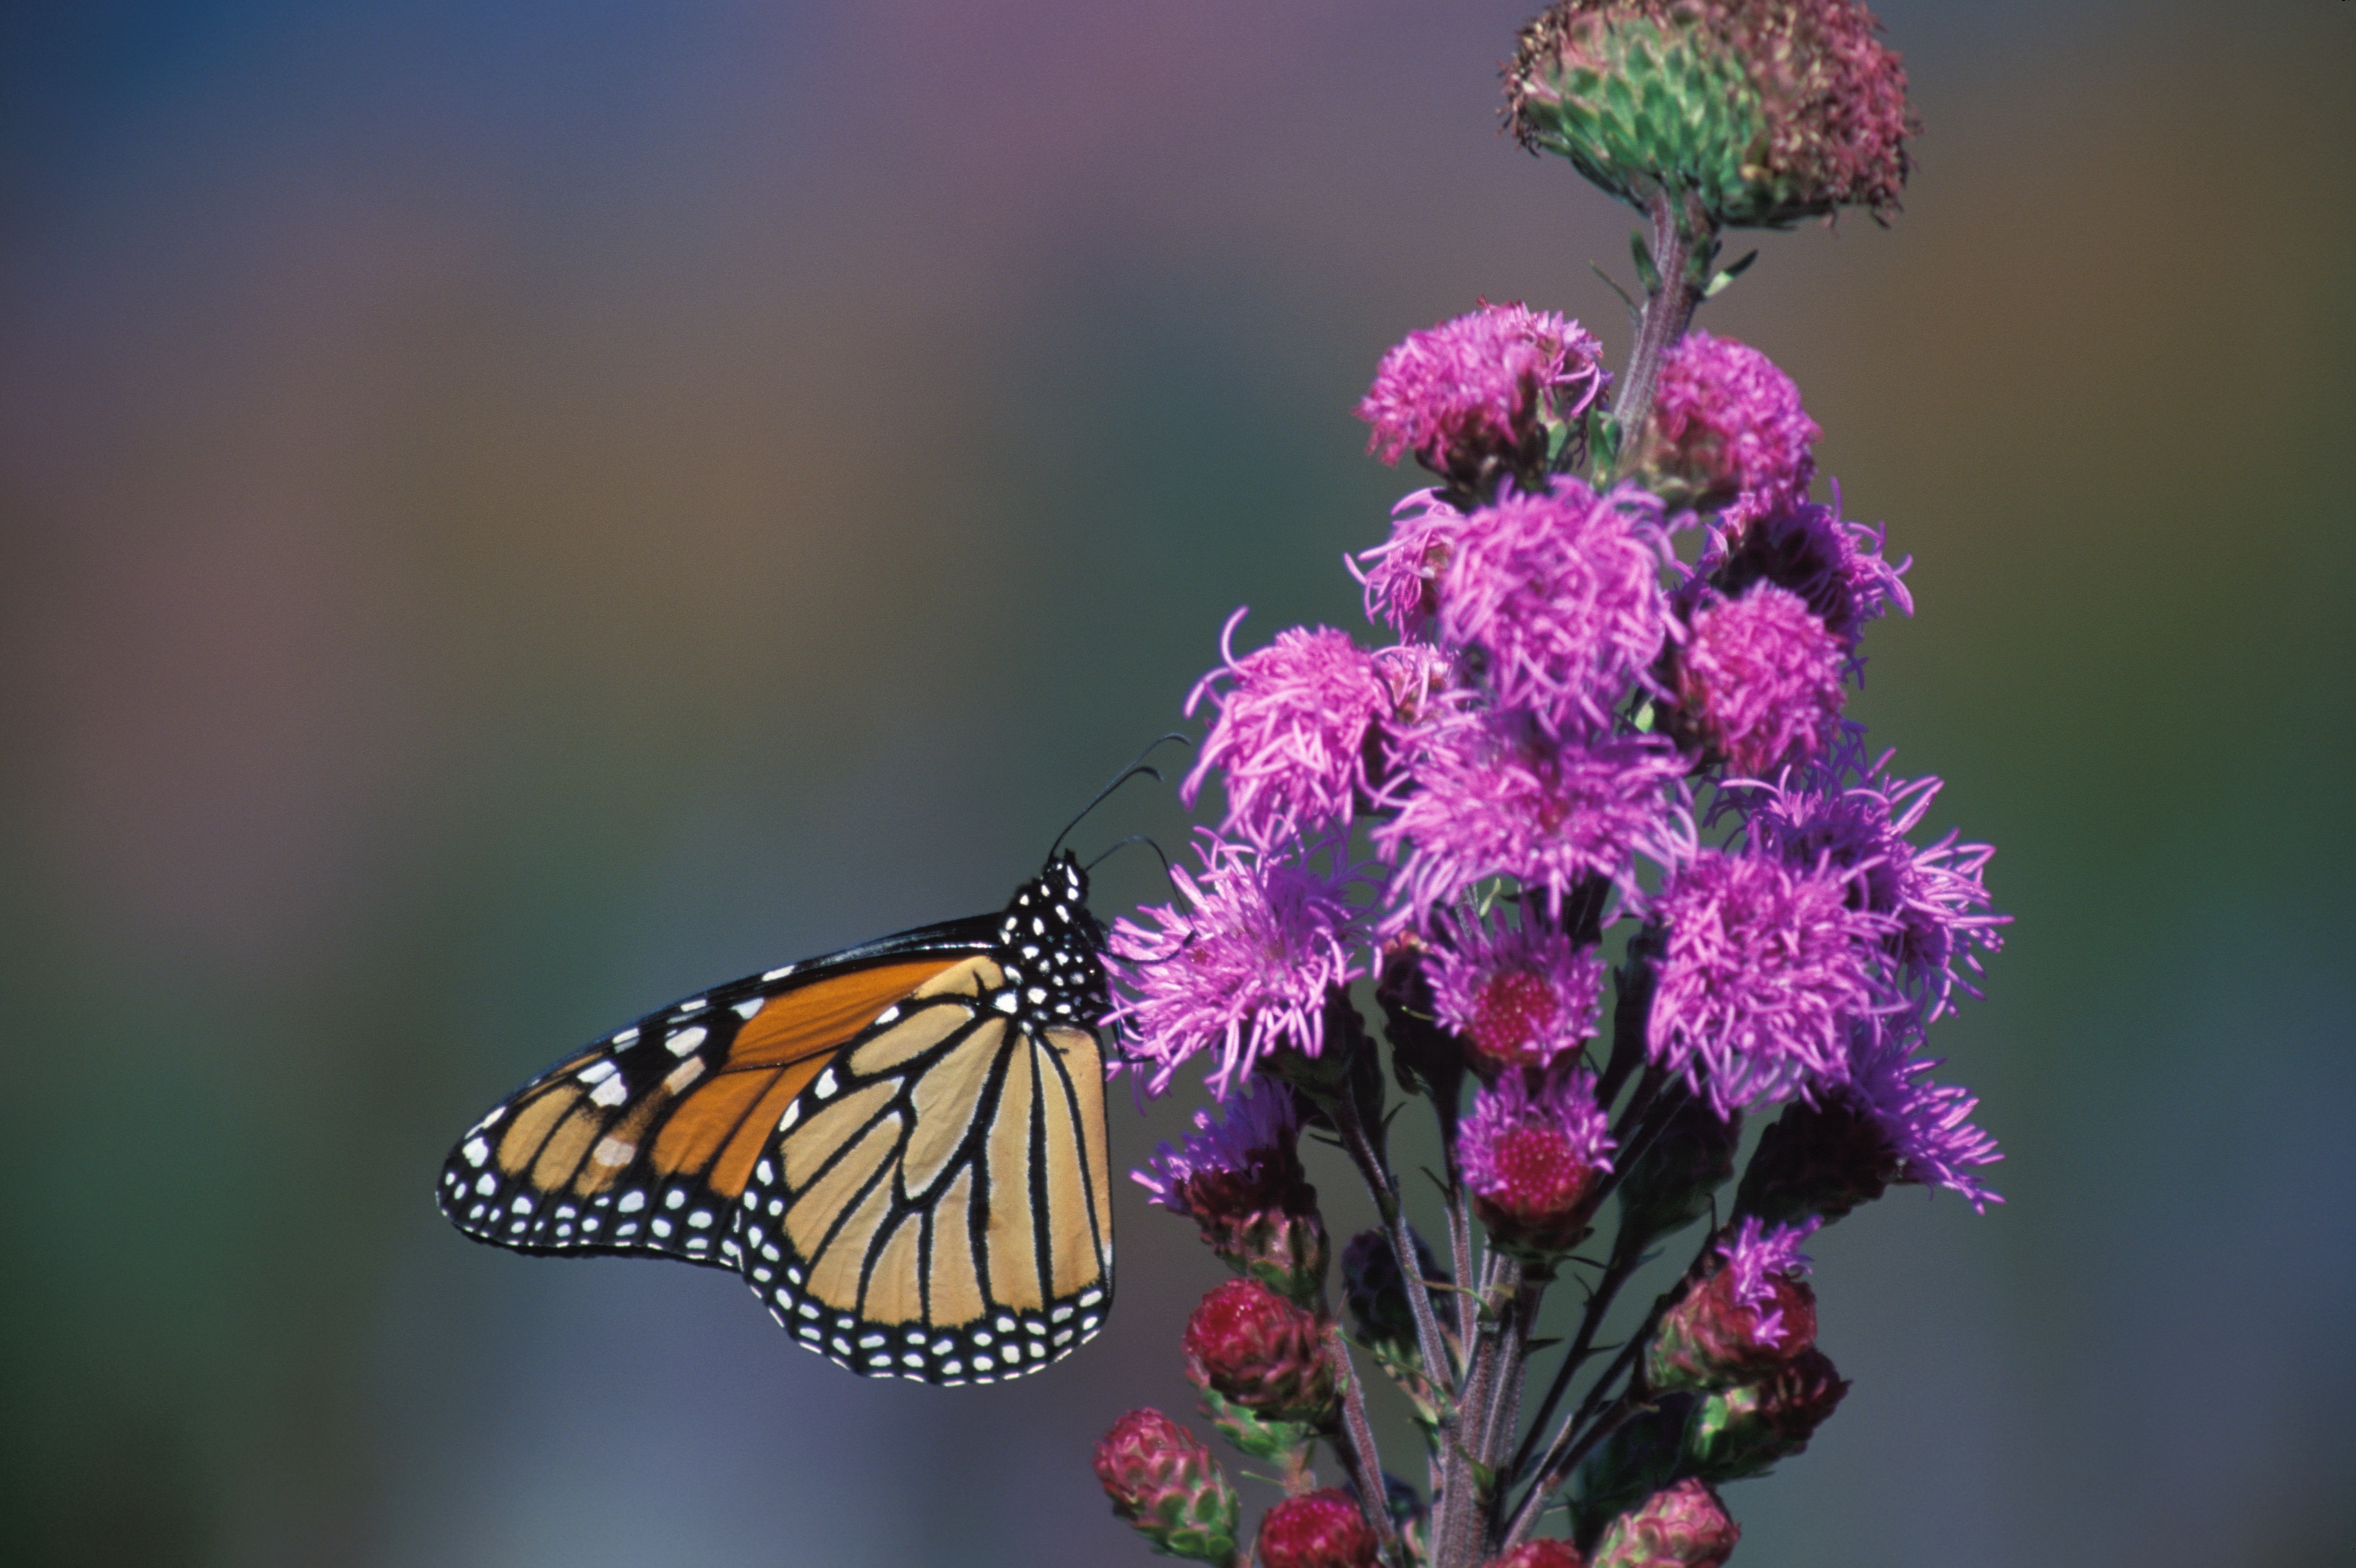 Monarch butterfly on the flower photo